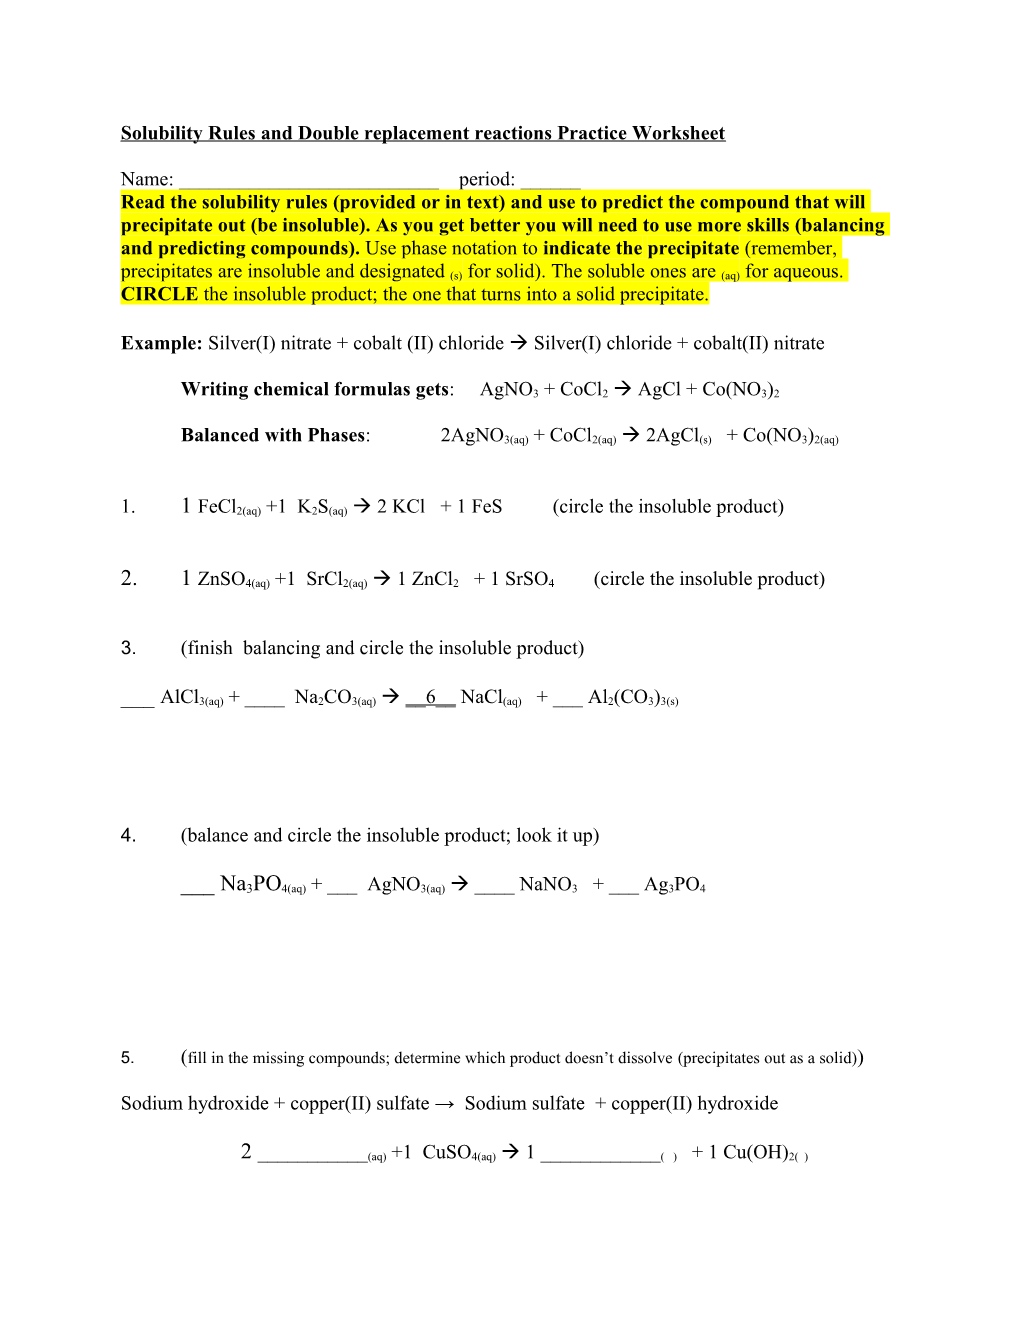 Solubility Rules and Double Replacement Reactions Practice Worksheet